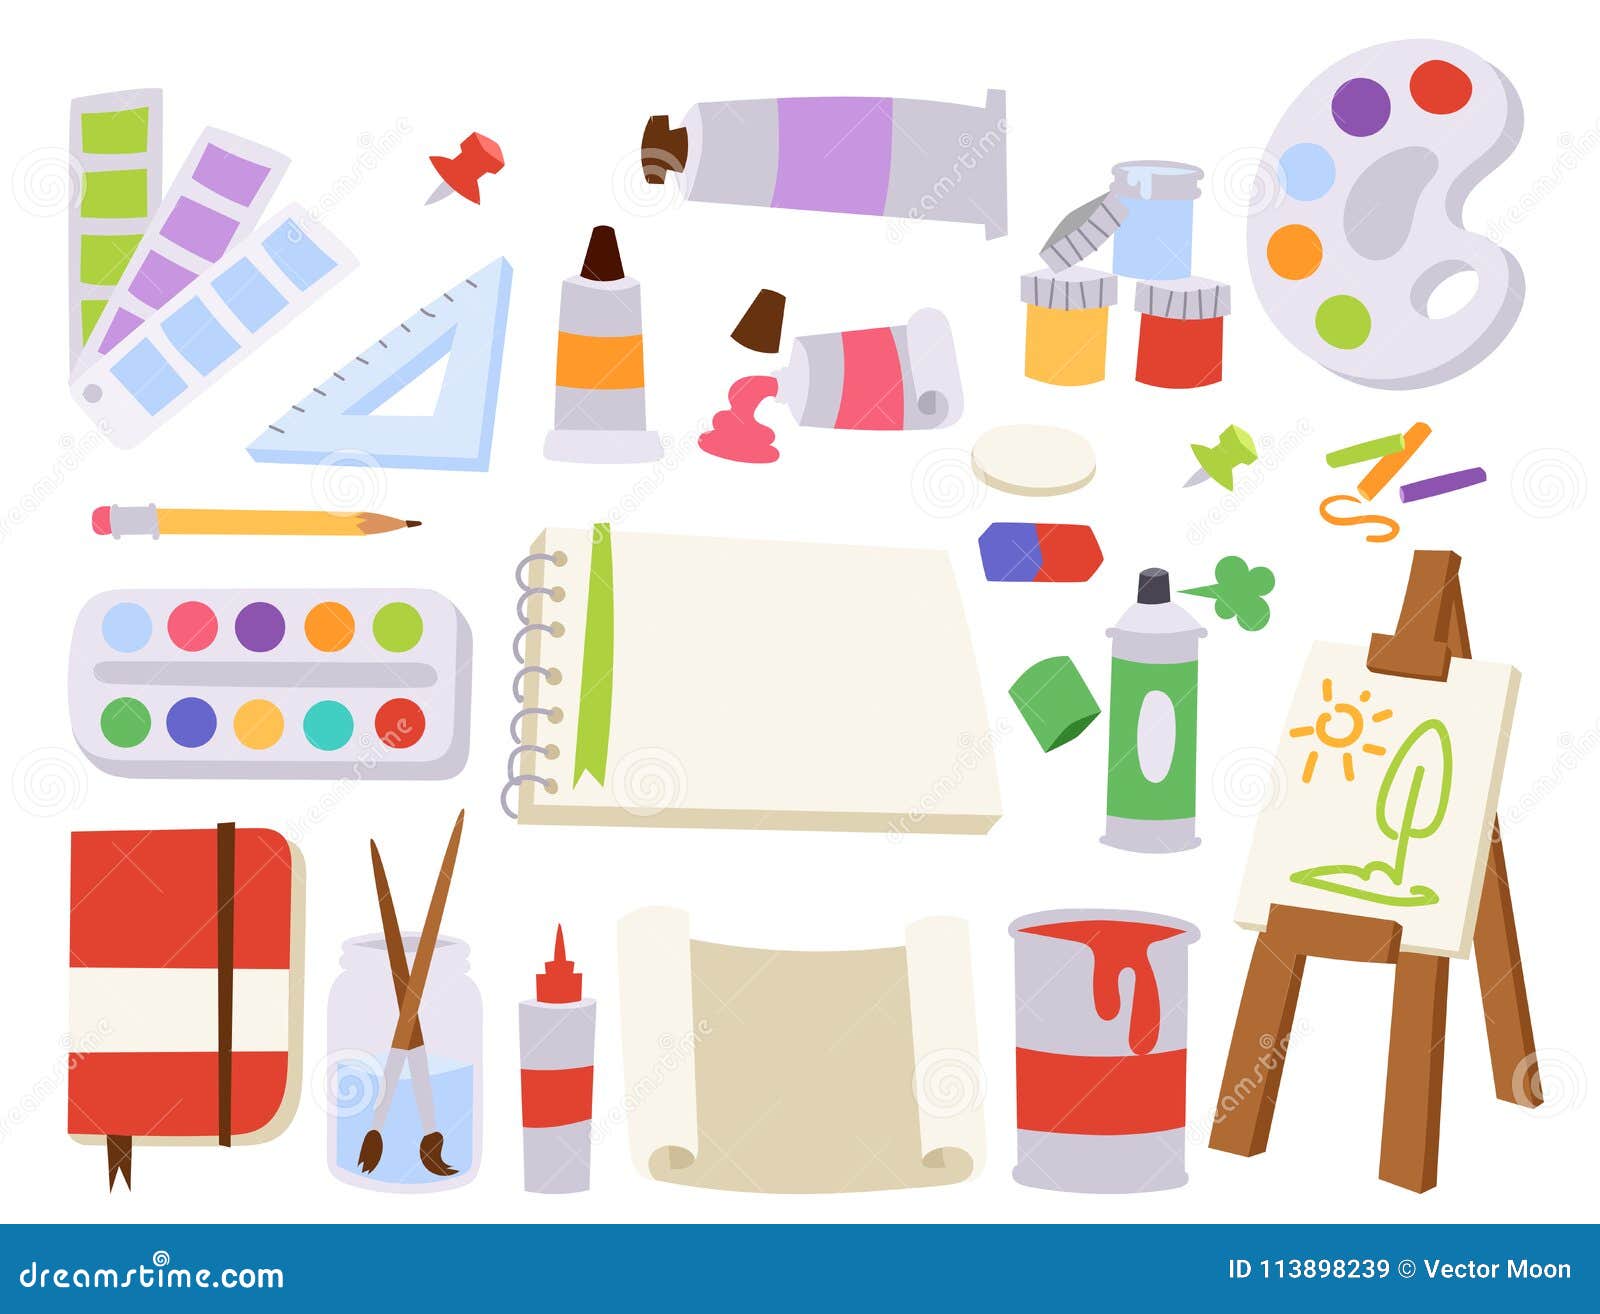 Artist palette with art tools and supplies Vector Image